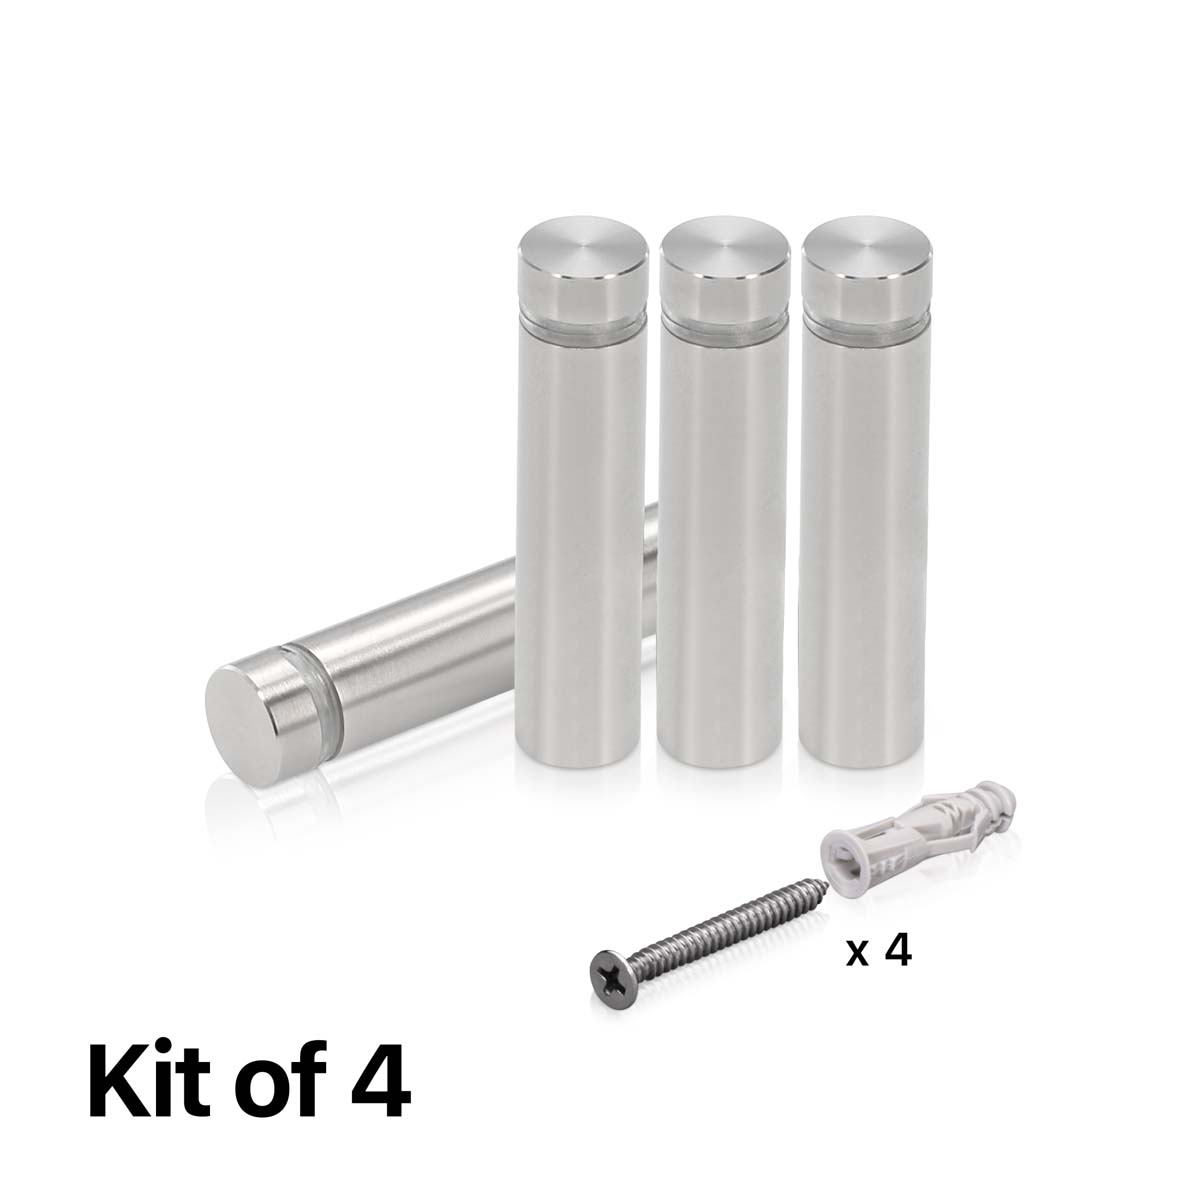 (Set of 4) 1/2'' Diameter X 1-3/4'' Barrel Length, Hollow Stainless Steel Brushed Finish. Easy Fasten Standoff with (4) 2208Z Screws and (4) LANC1 Anchors for concrete or drywall (For Inside Use Only) [Required Material Hole Size: 3/8'']